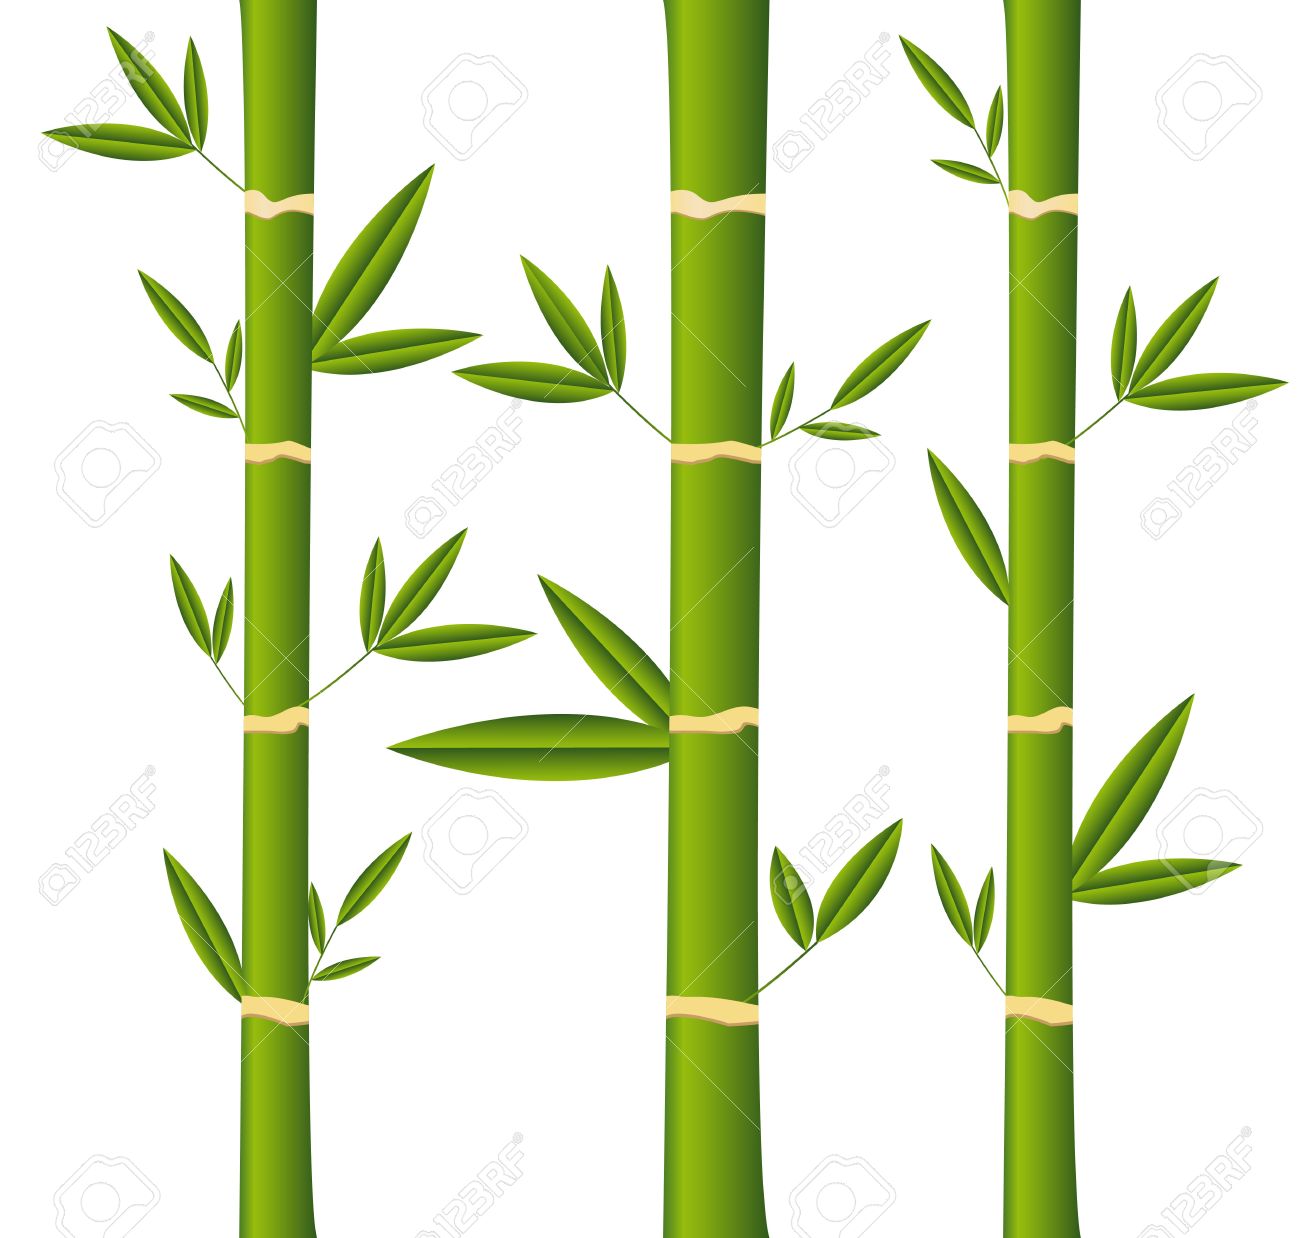 Bamboo Sticks With Leaves Over White Background Royalty